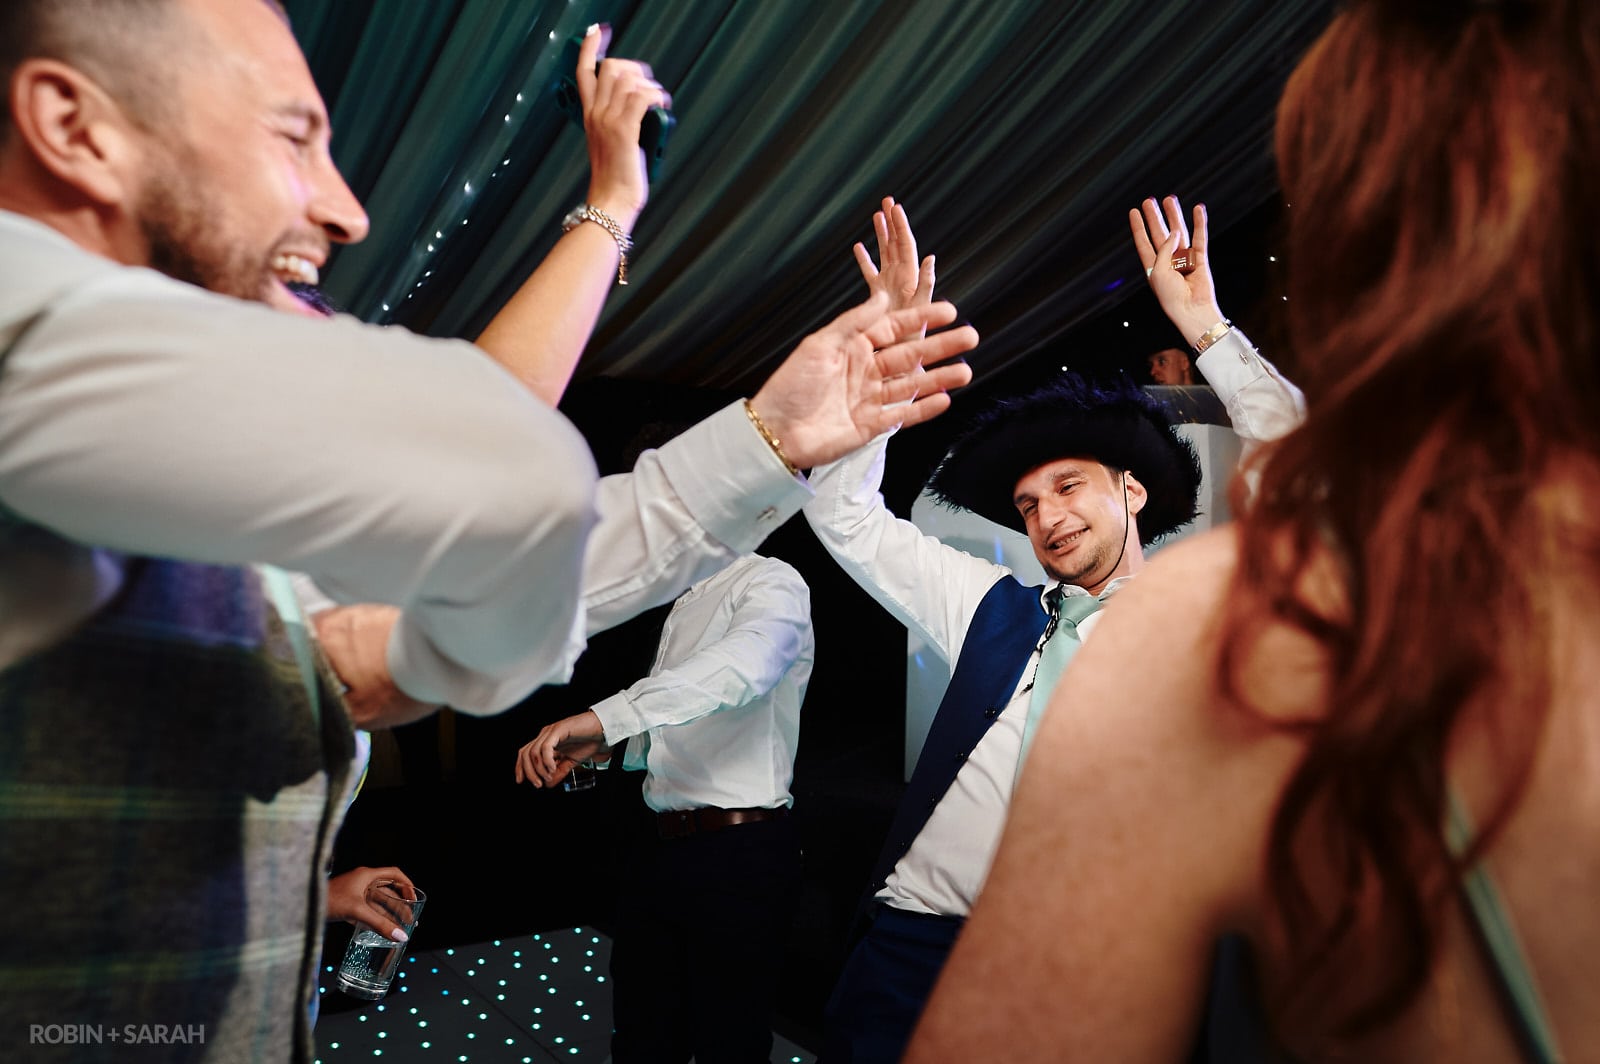 Guests dancing at wedding party held in marquee at Coombe Abbey